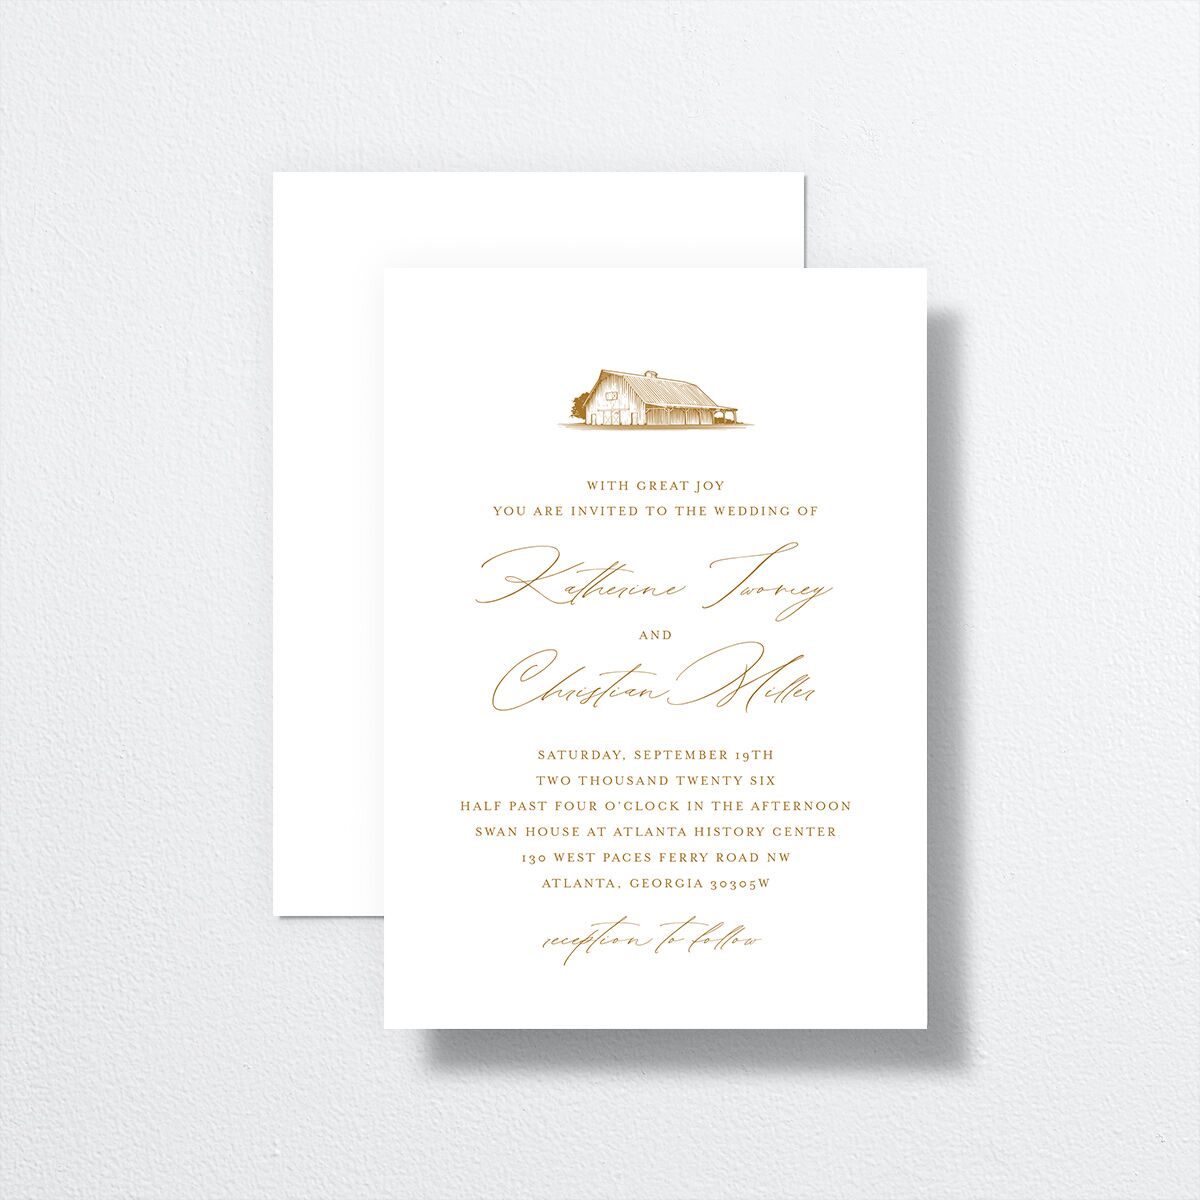 Classic Landscape Wedding Invitations front-and-back in gold